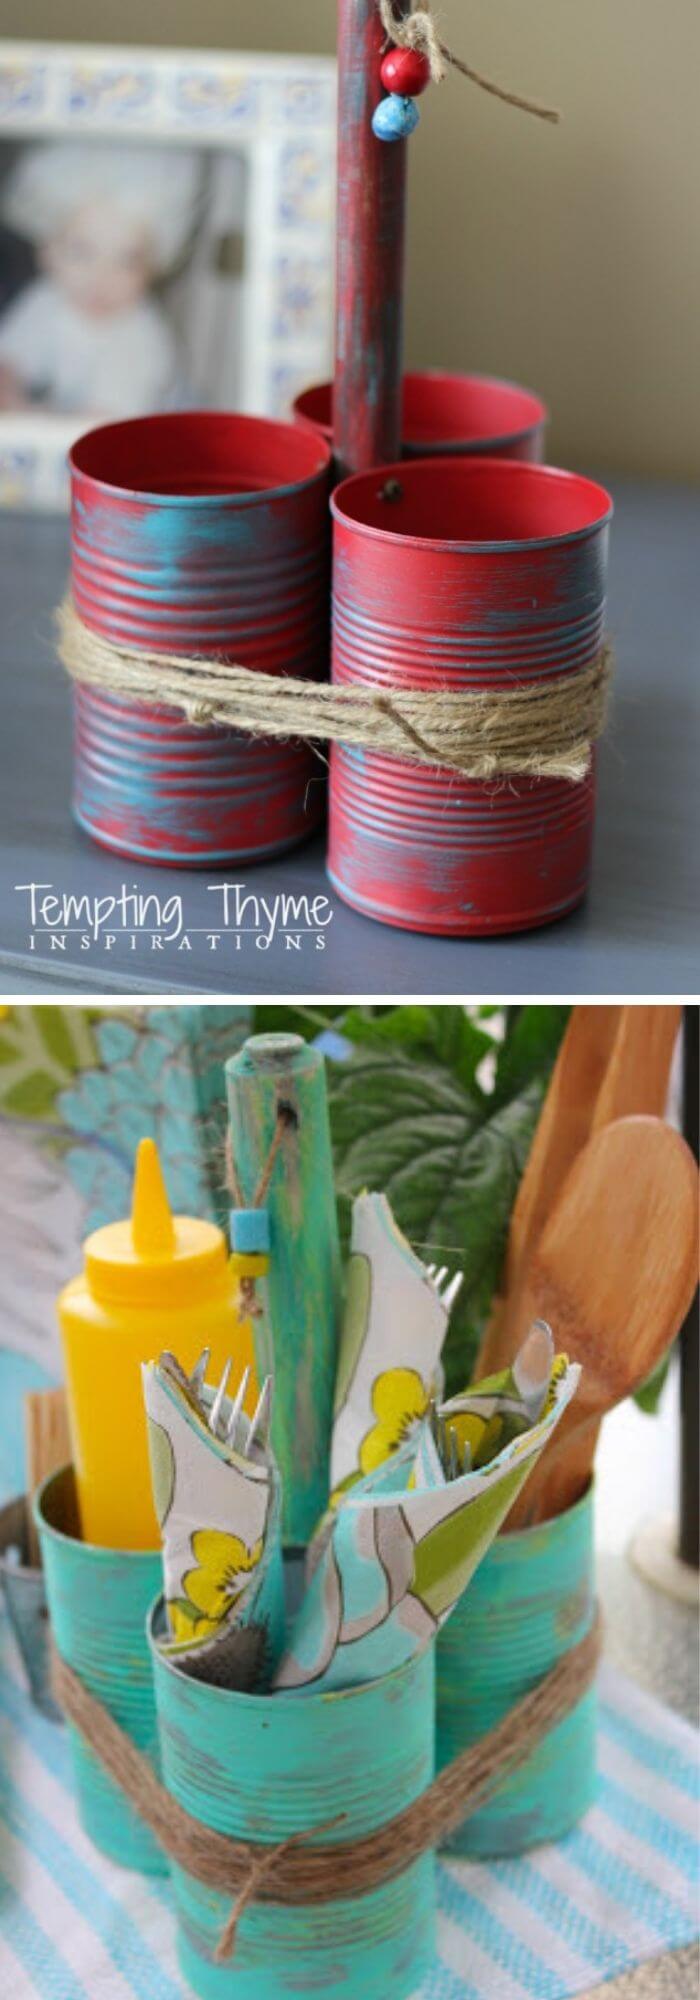 Upcycled tin can caddy